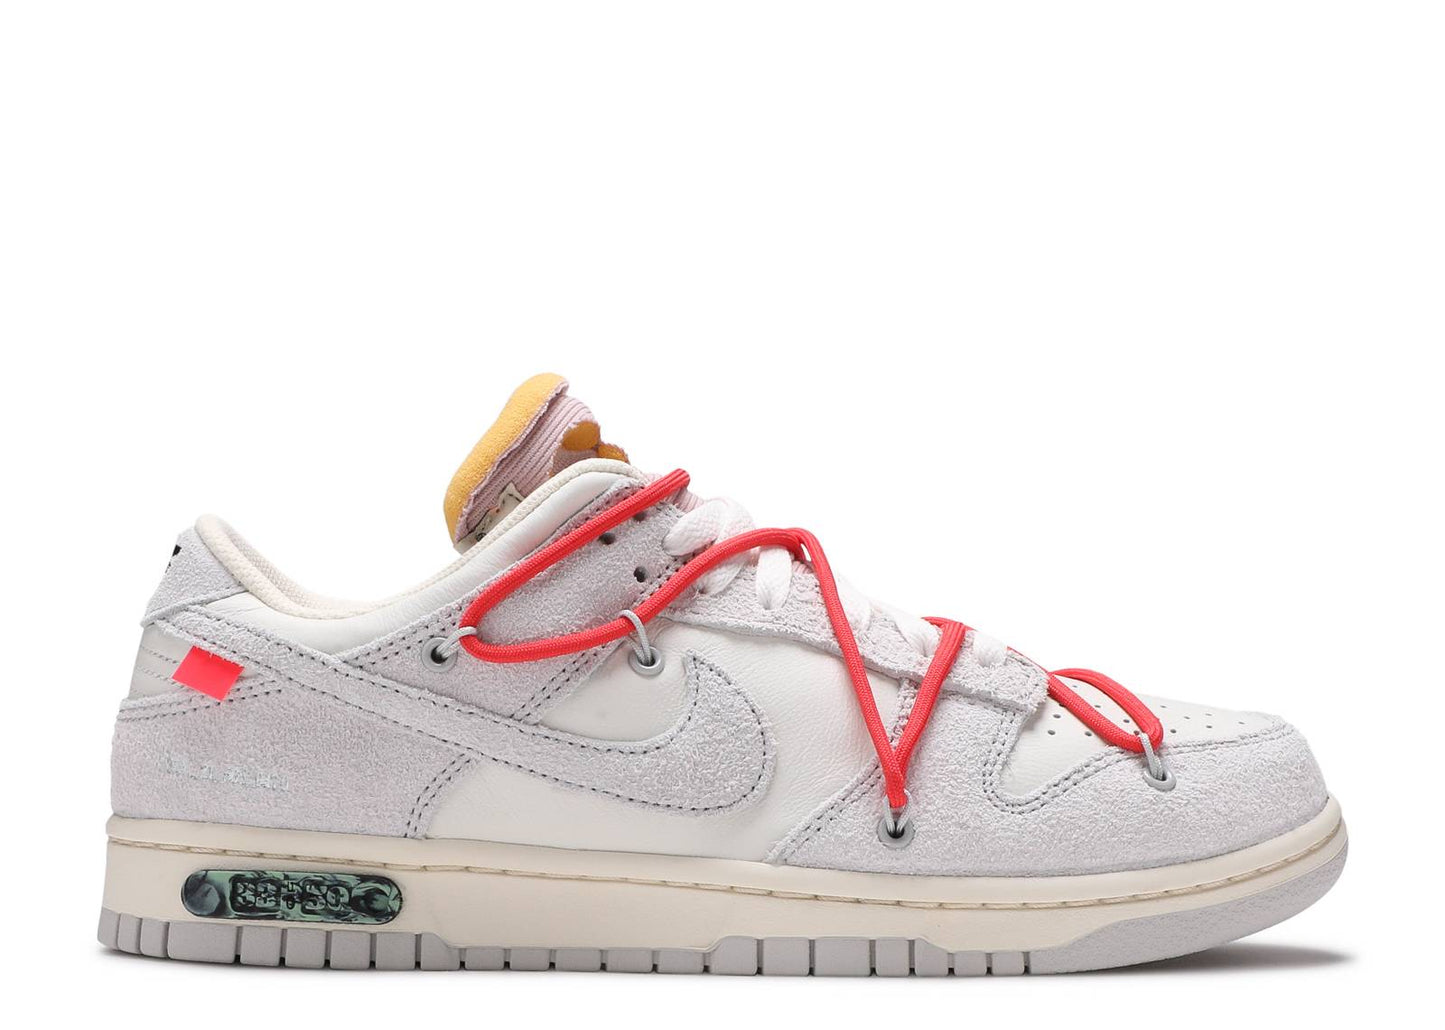 Off-White x Nike Dunk Low "Dear Summer - Lot 33 of 50"